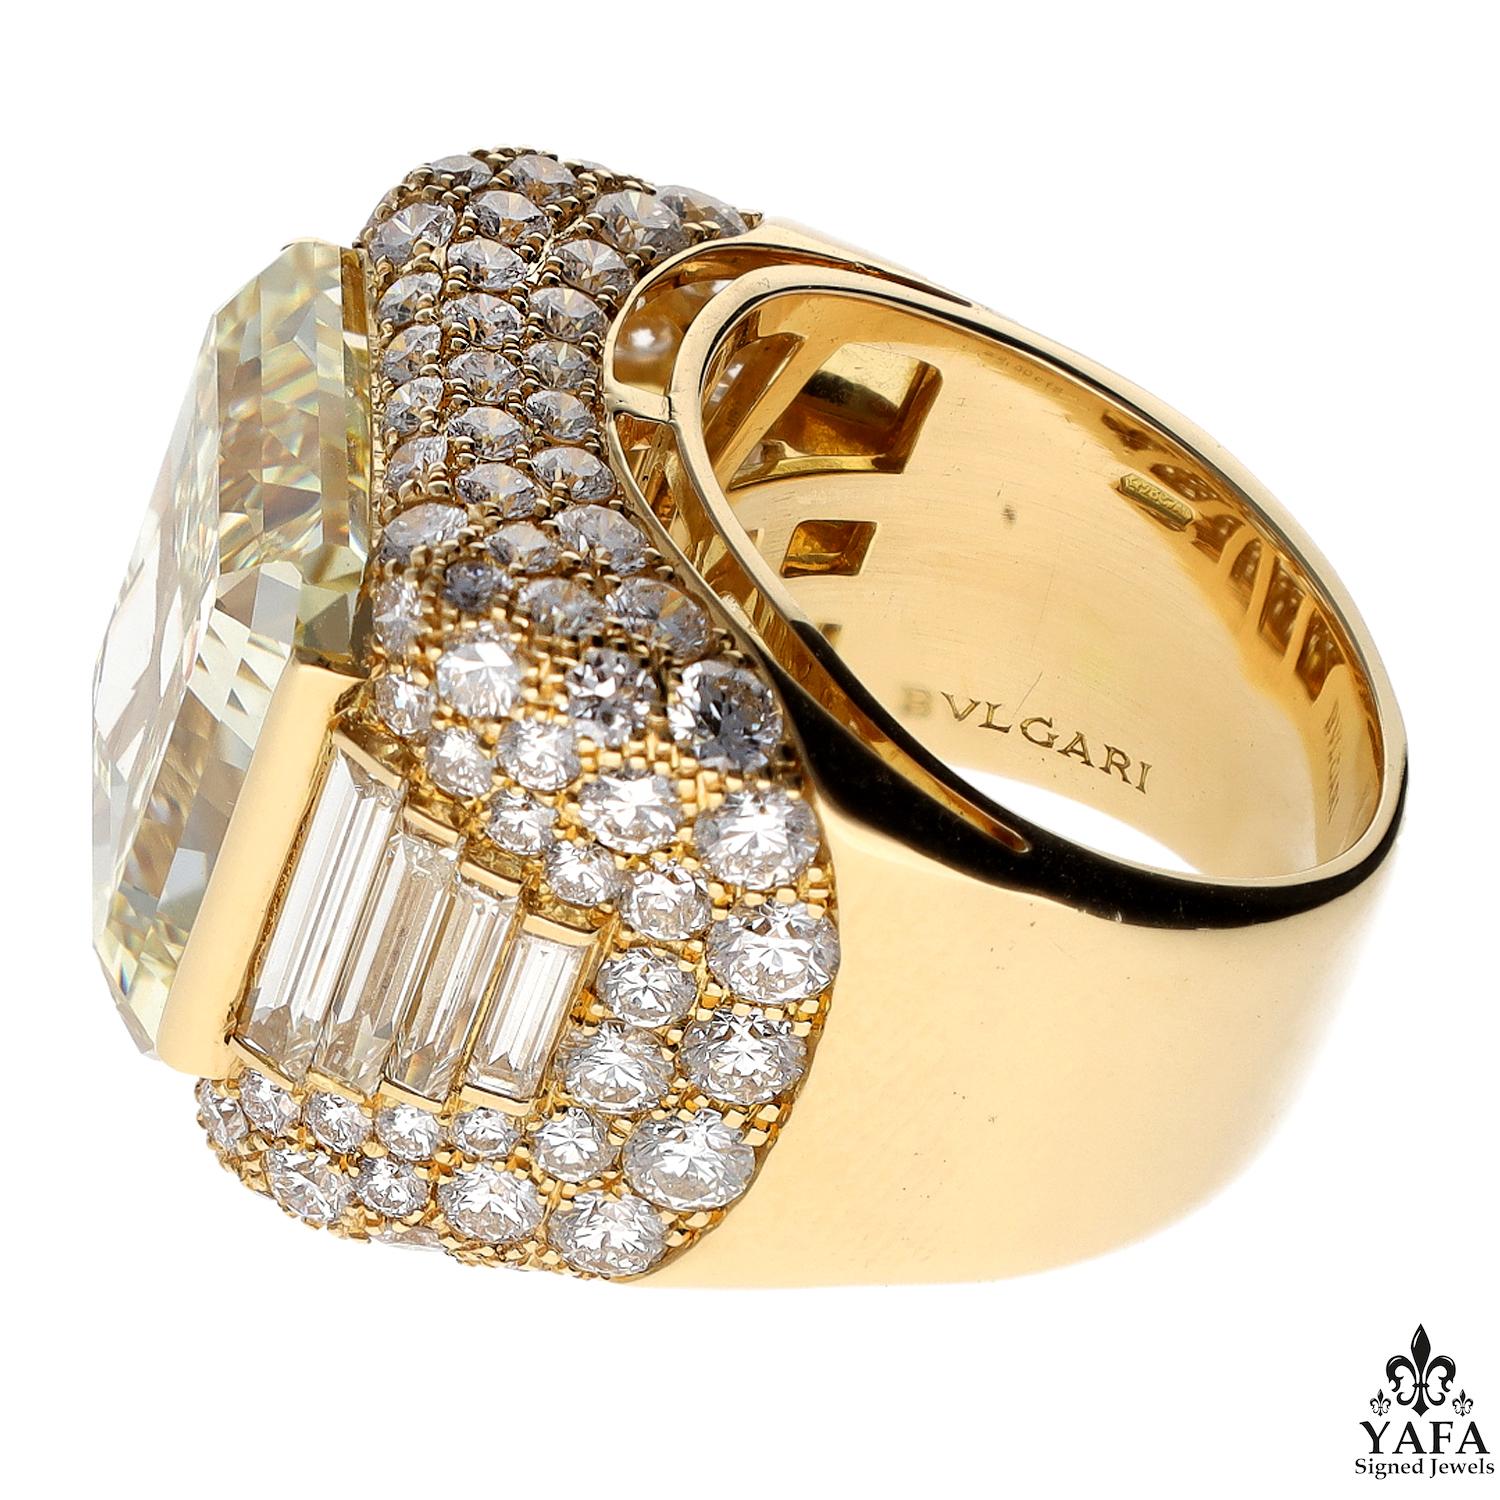 Bulgari Rome Fancy Yellow Cut Cornered Square 22.50 Carat Diamond Gold Cocktail Statement Trombino Ring From Our Signed Jewels Vintage Collection

A magnificent and rare Bulgari Rome unique GIA Certified 'Trombino' large fancy yellow diamond ring.